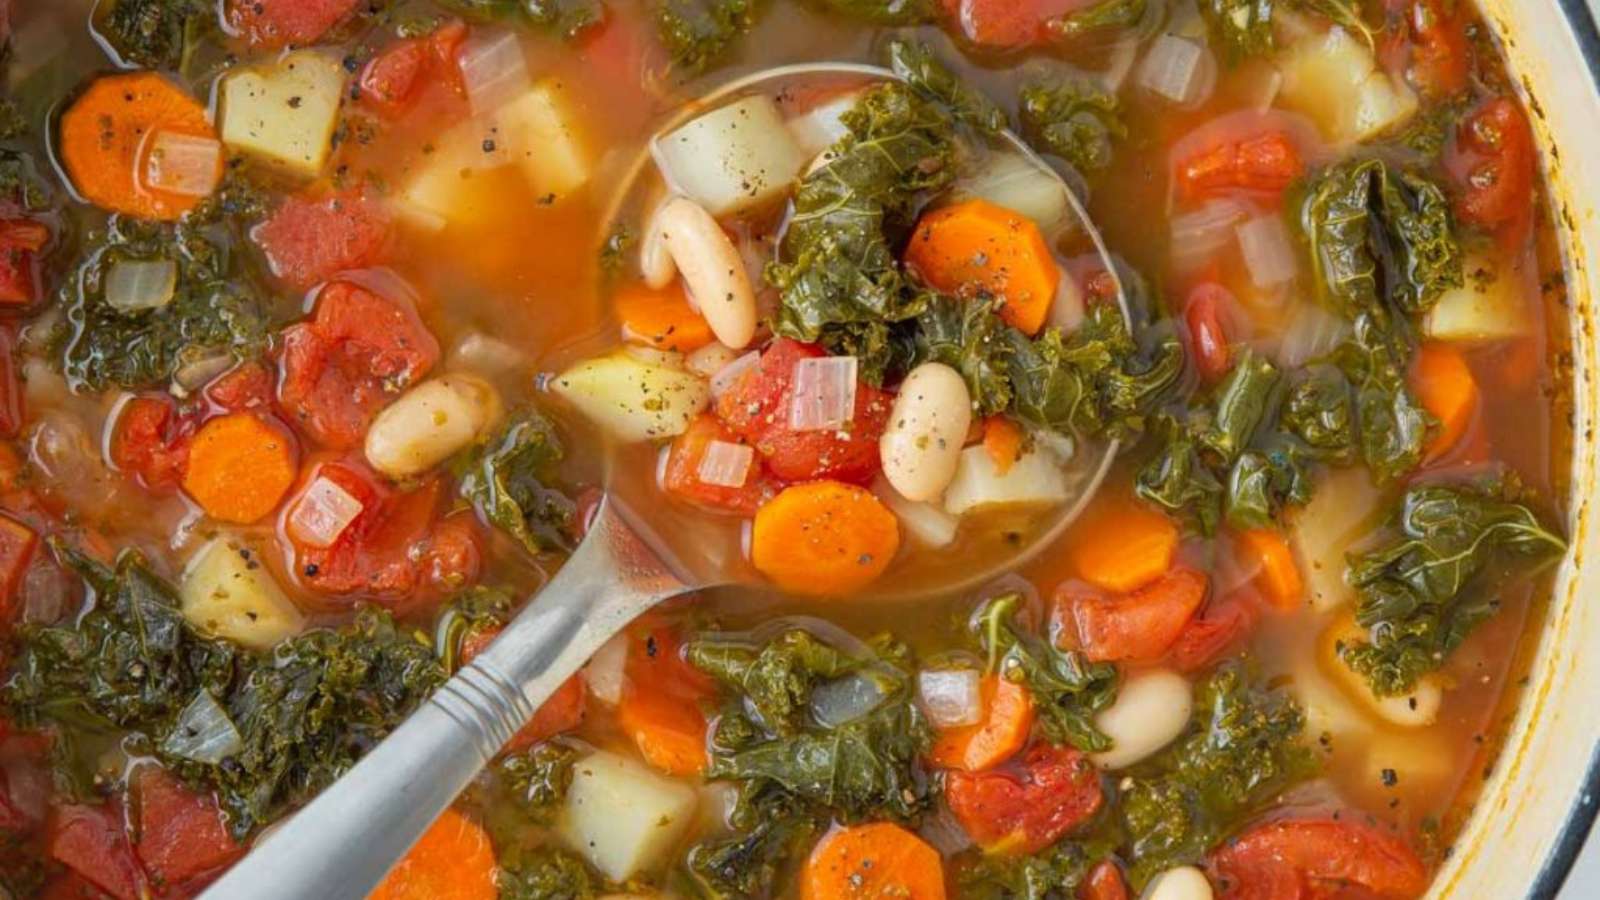 A spoonful of soup with vegetables and beans.